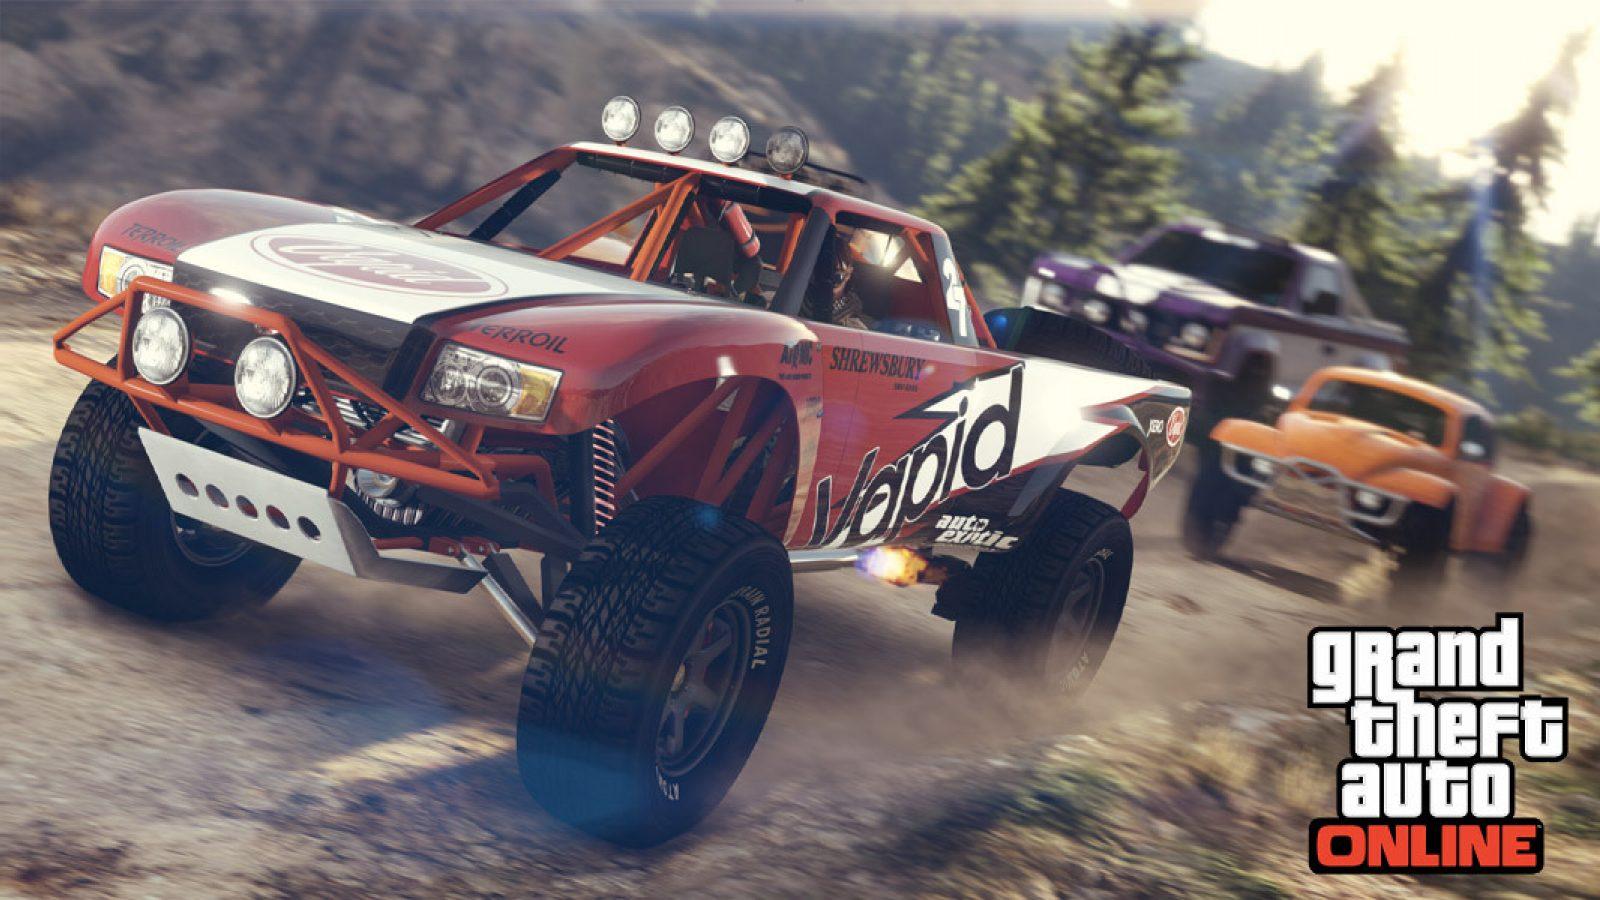 GTA Online Prime Gaming Rewards (September): How To Claim Benefits and More